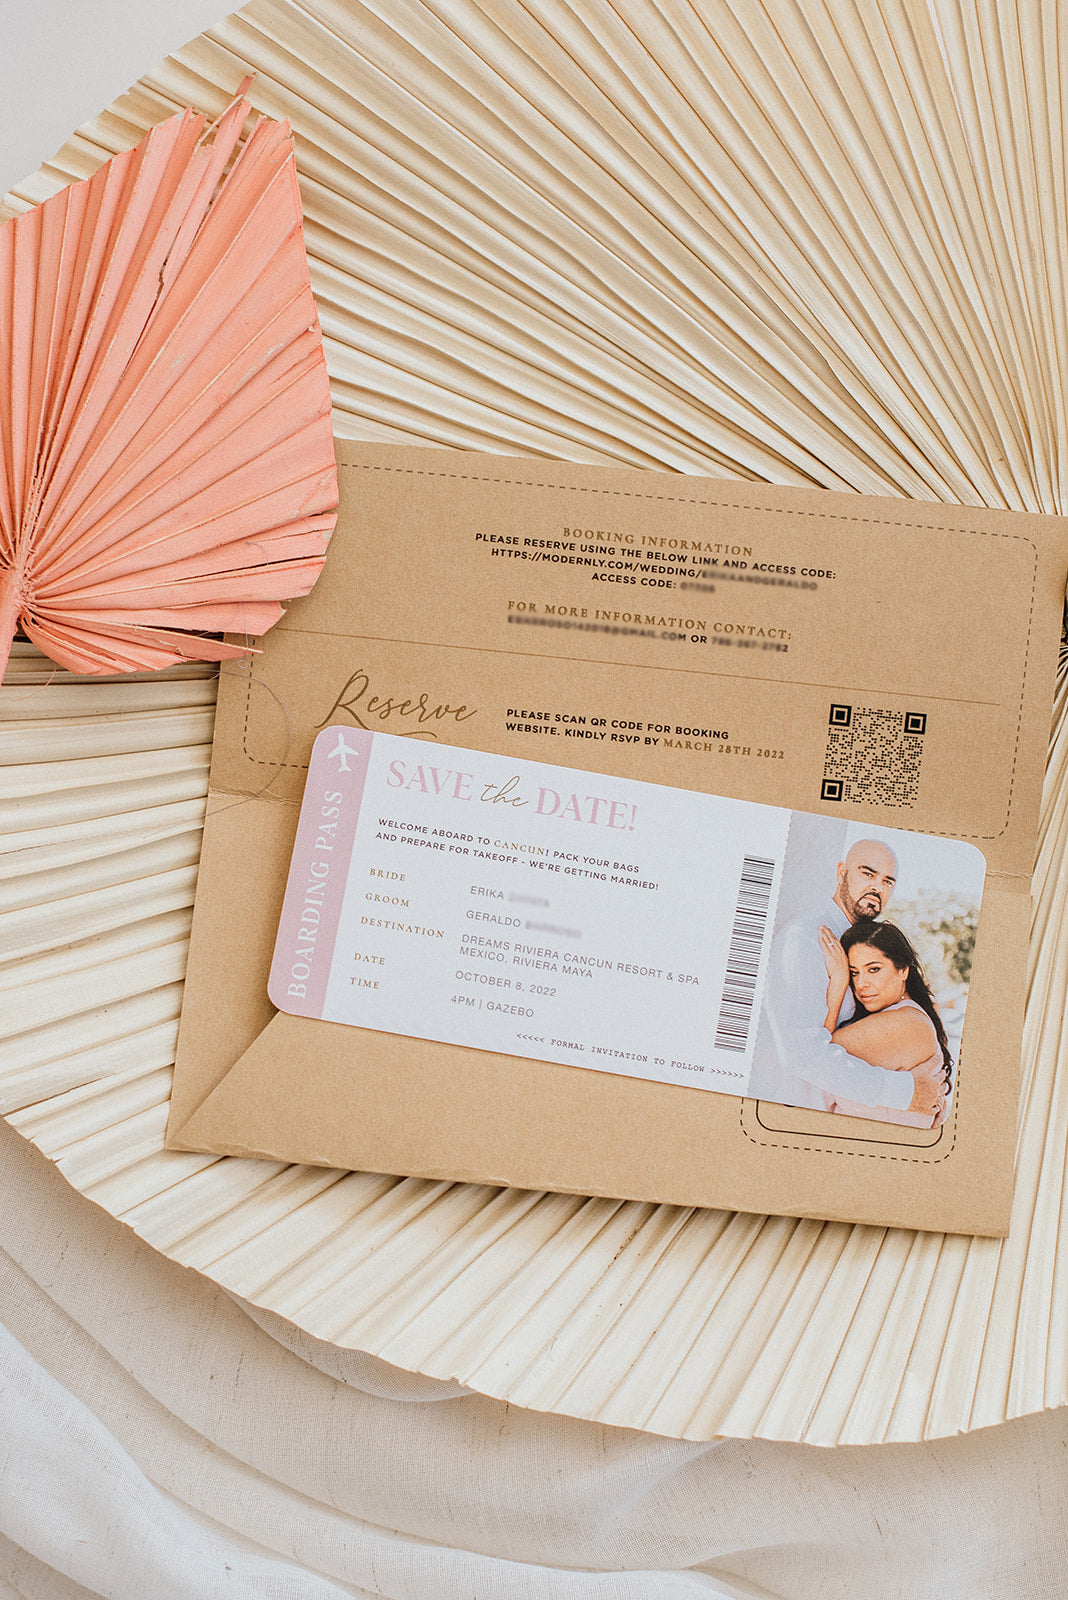 Save The Date (Boarding Pass Set) – Here and There Weddings